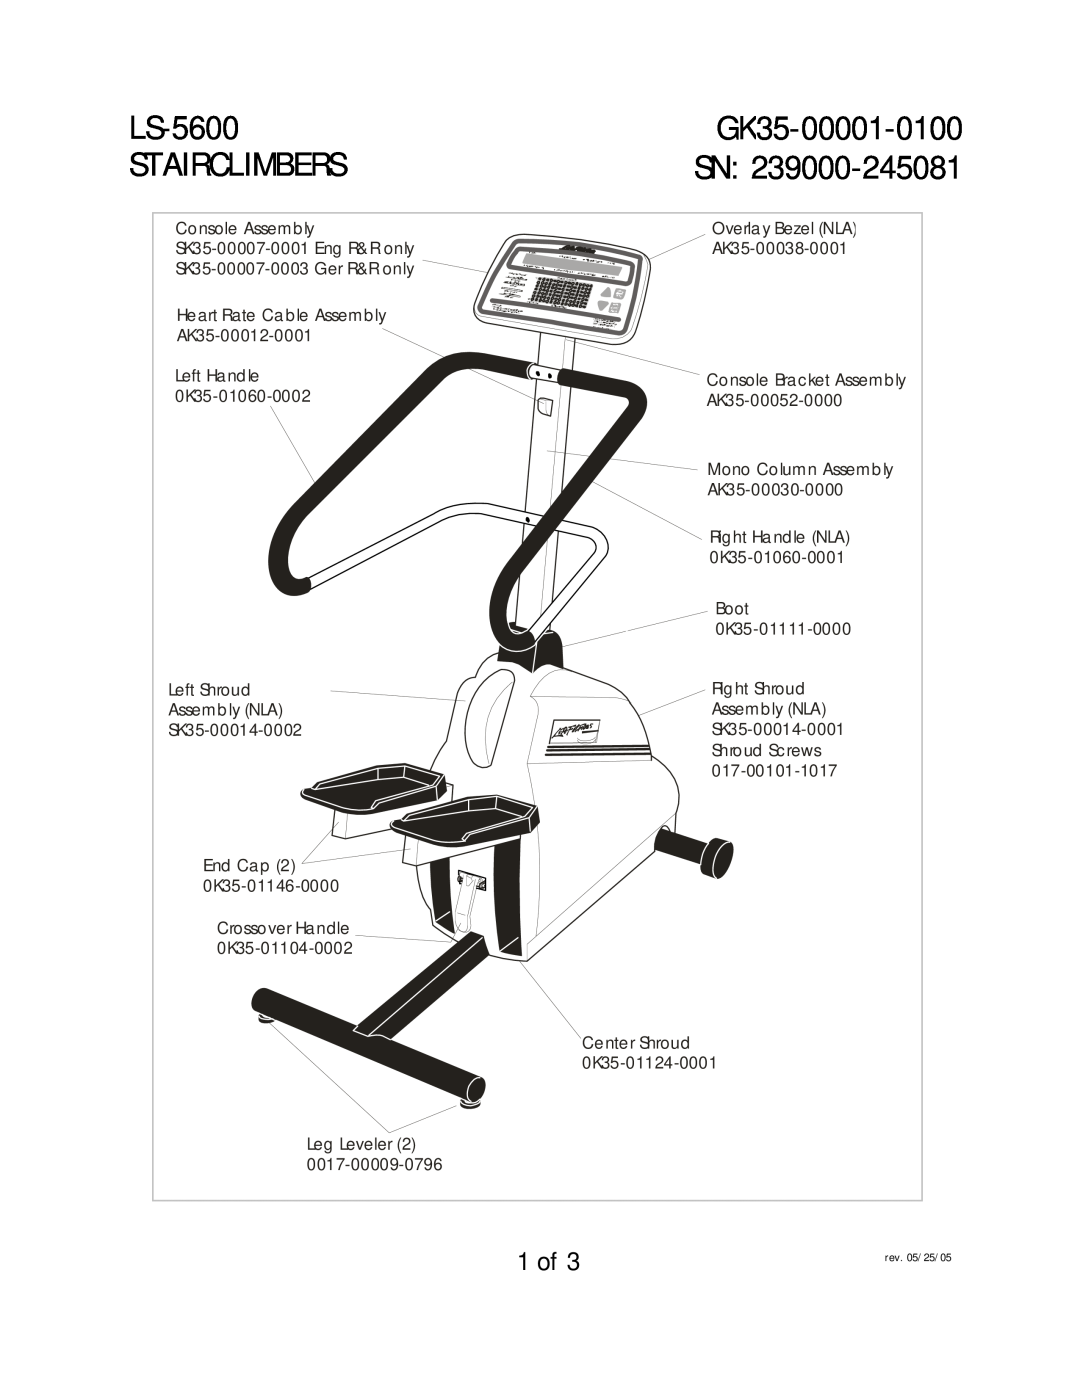 Life Fitness LS-5600 manual Stairclimbers, GK35-00001-0100, 1 of 